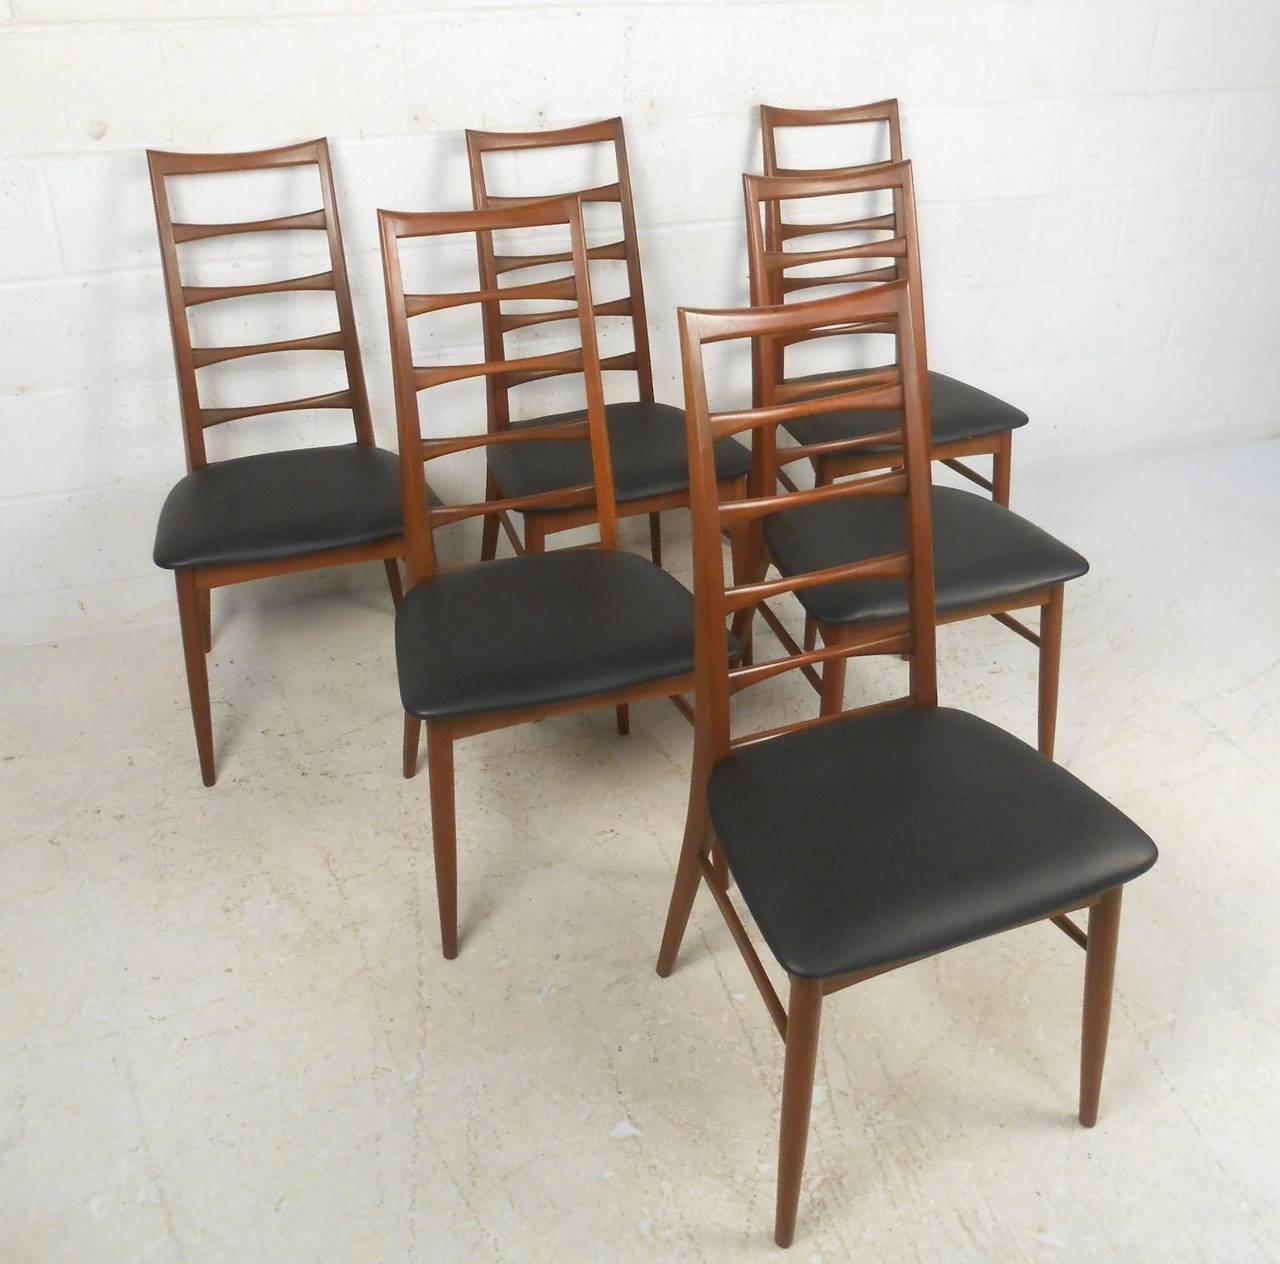 This gorgeous Mid-Century Modern dining set includes six ladder back Kofoed chairs and a wonderful teak draw leaf dining table. Wonderful sculpted backs, added stretchers for support, and tapered legs show off the wonderful design of this Classic